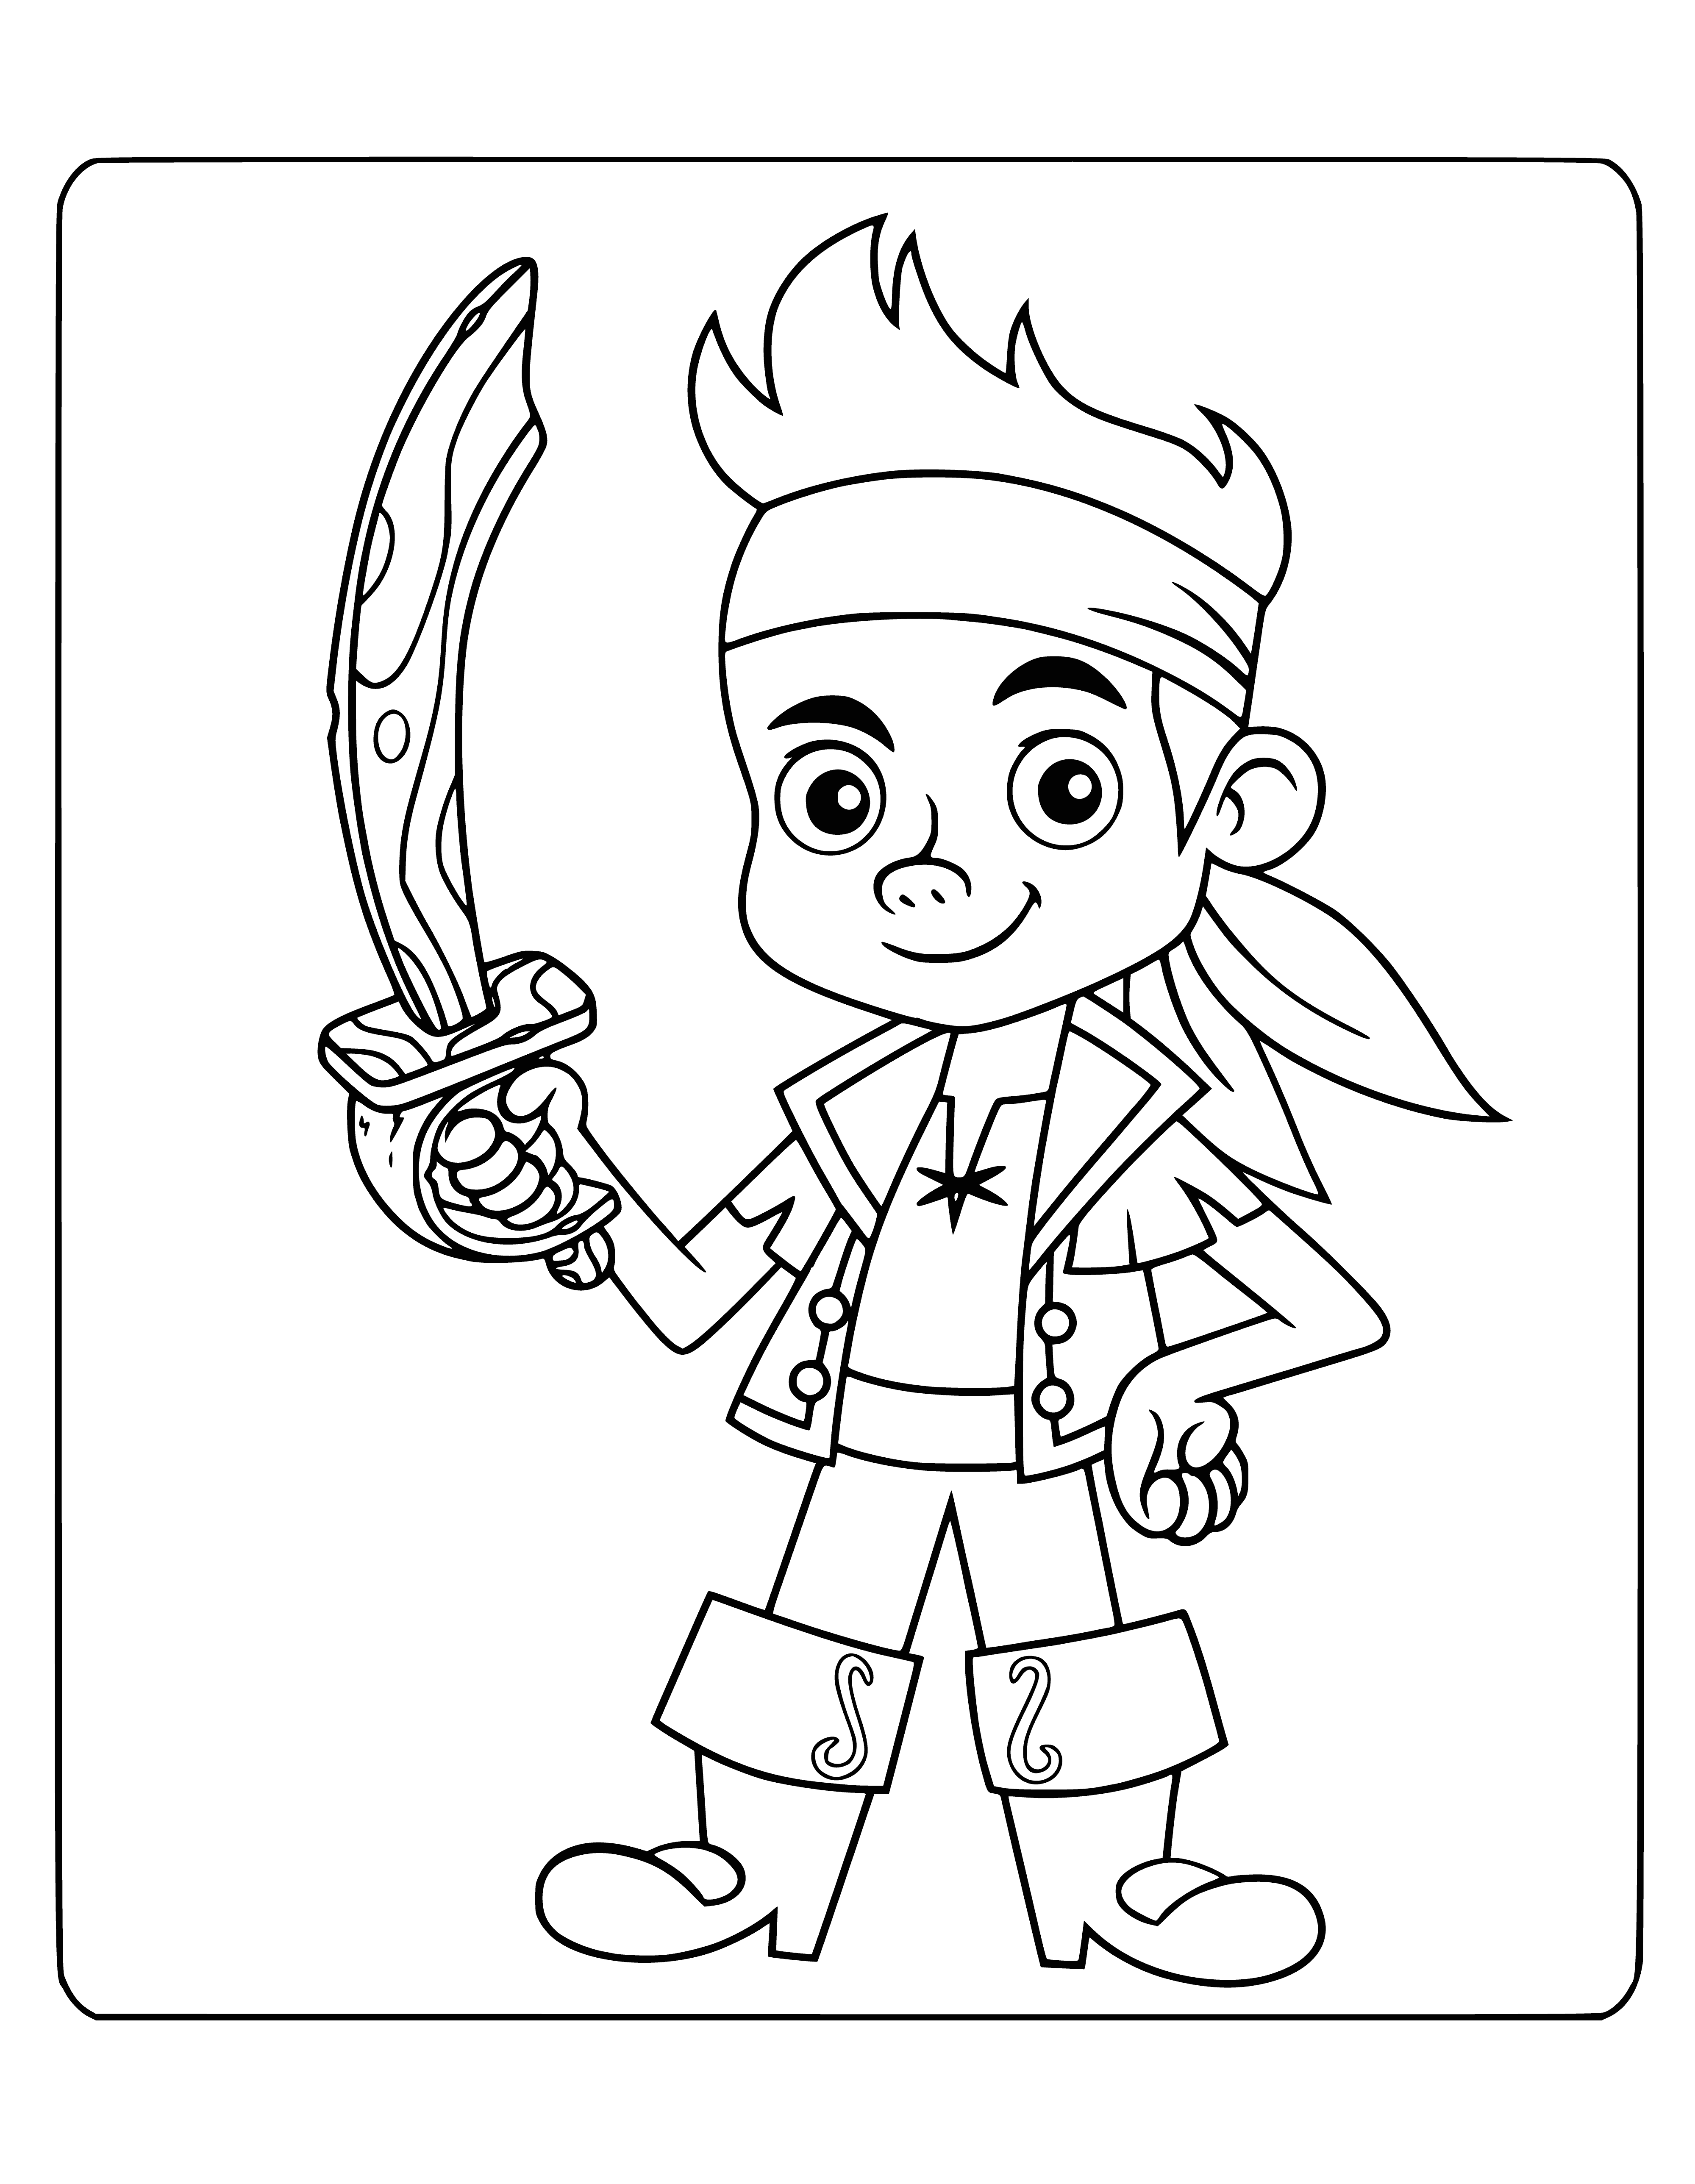 coloring page: Jake, a young boy with black hair, is standing on a beach wearing a pirate hat and waving a pirate flag. Blue pants, red & white striped shirt. Feet in water.